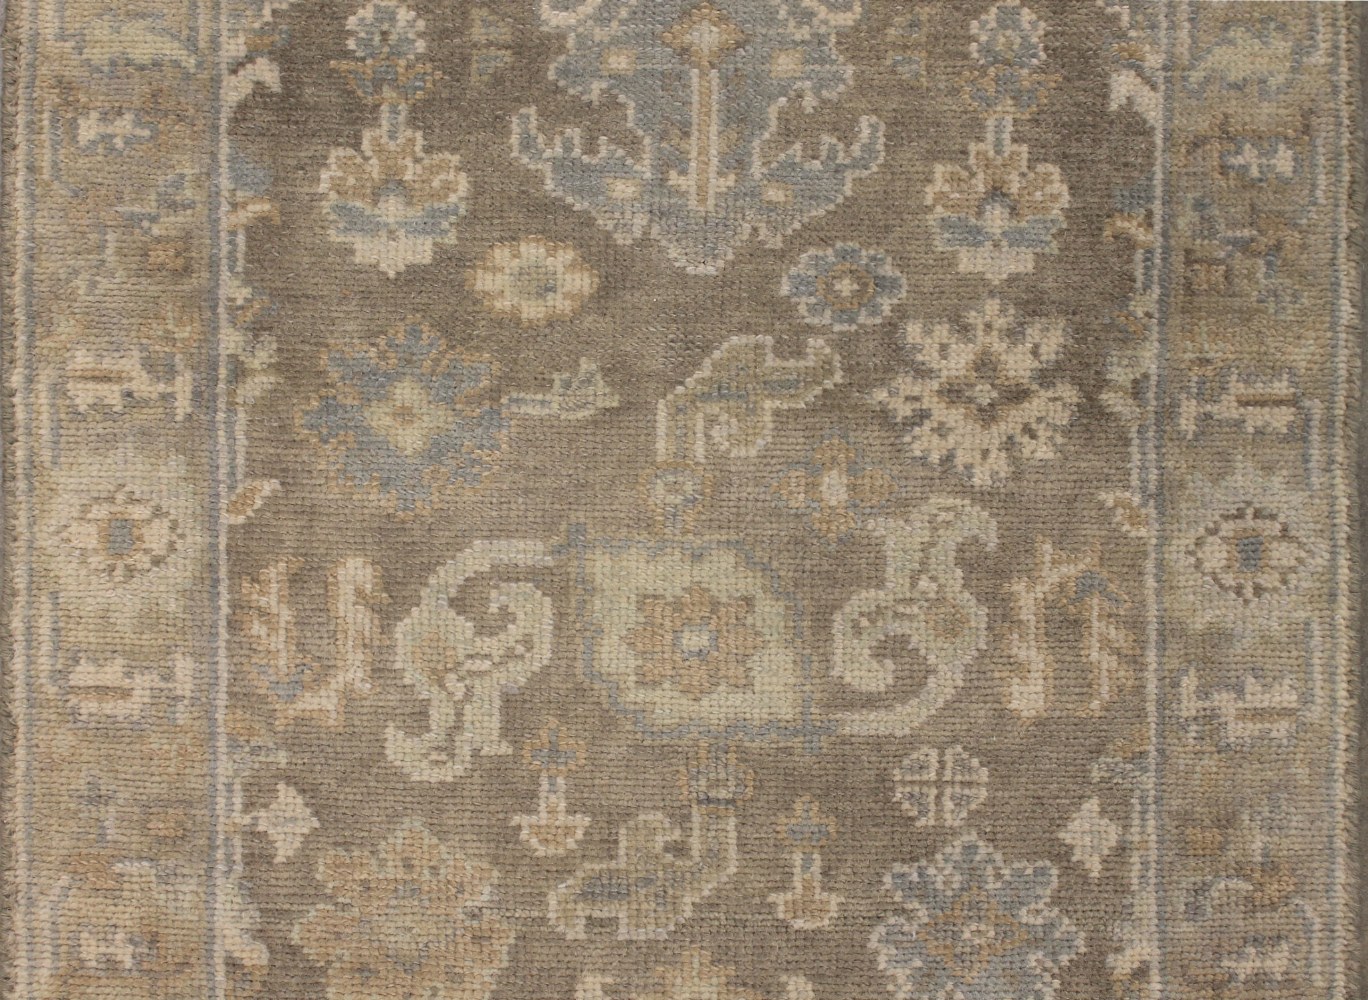 12 ft. Runner Oushak Hand Knotted Wool Area Rug - MR028075